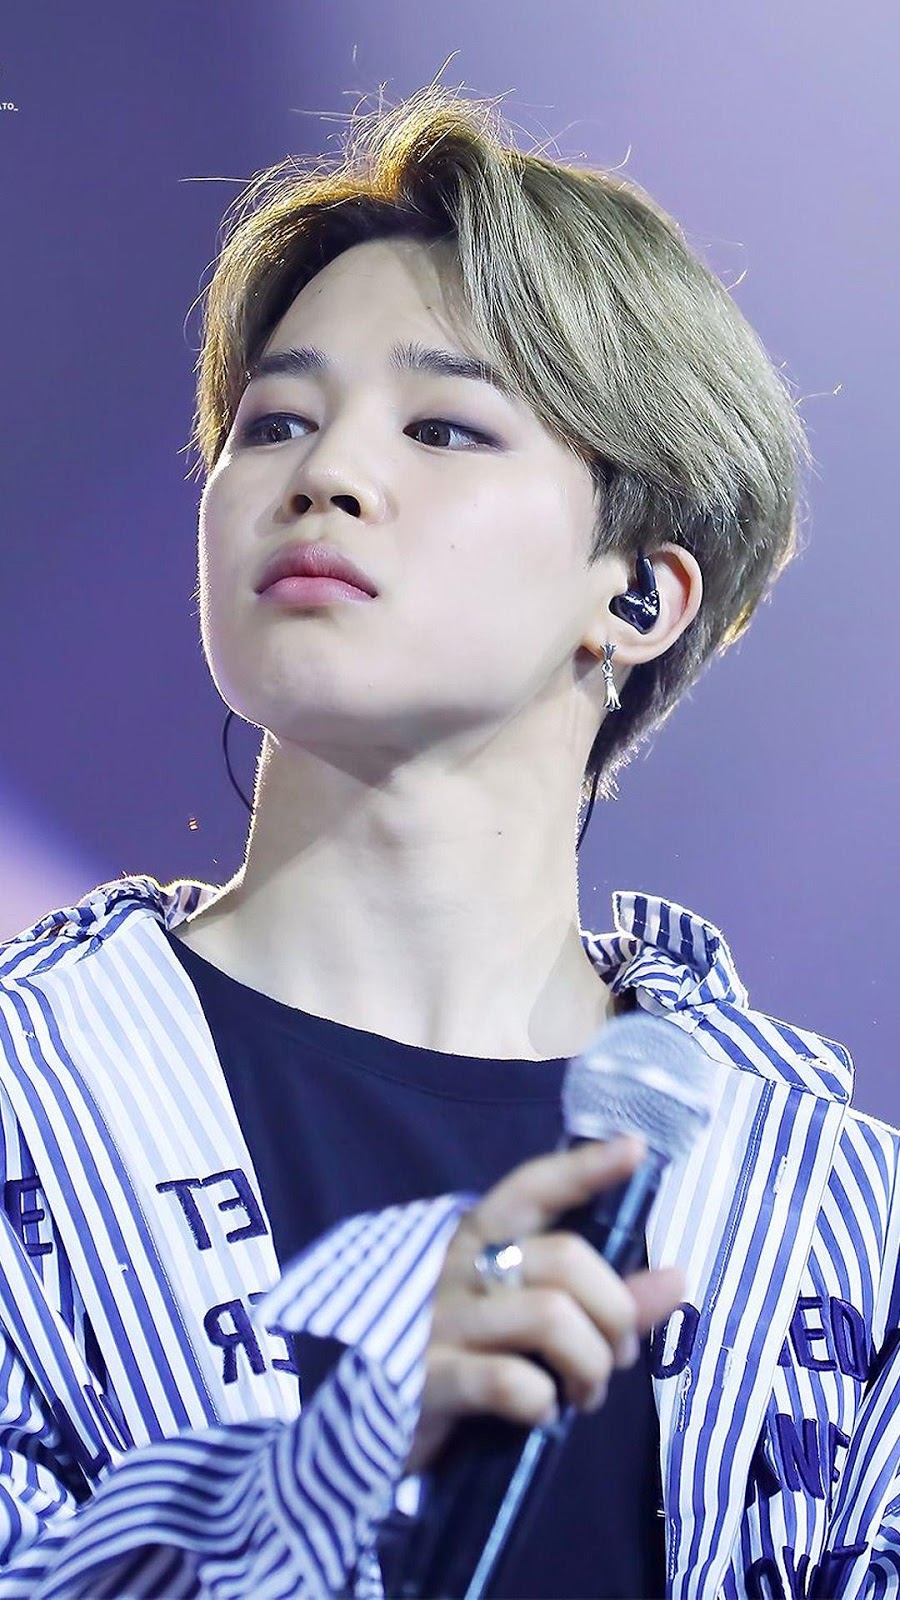 Latest BTS Jimin Cutest Wallpaper Collection | TheWaoFam Wallpaper | WaoFam